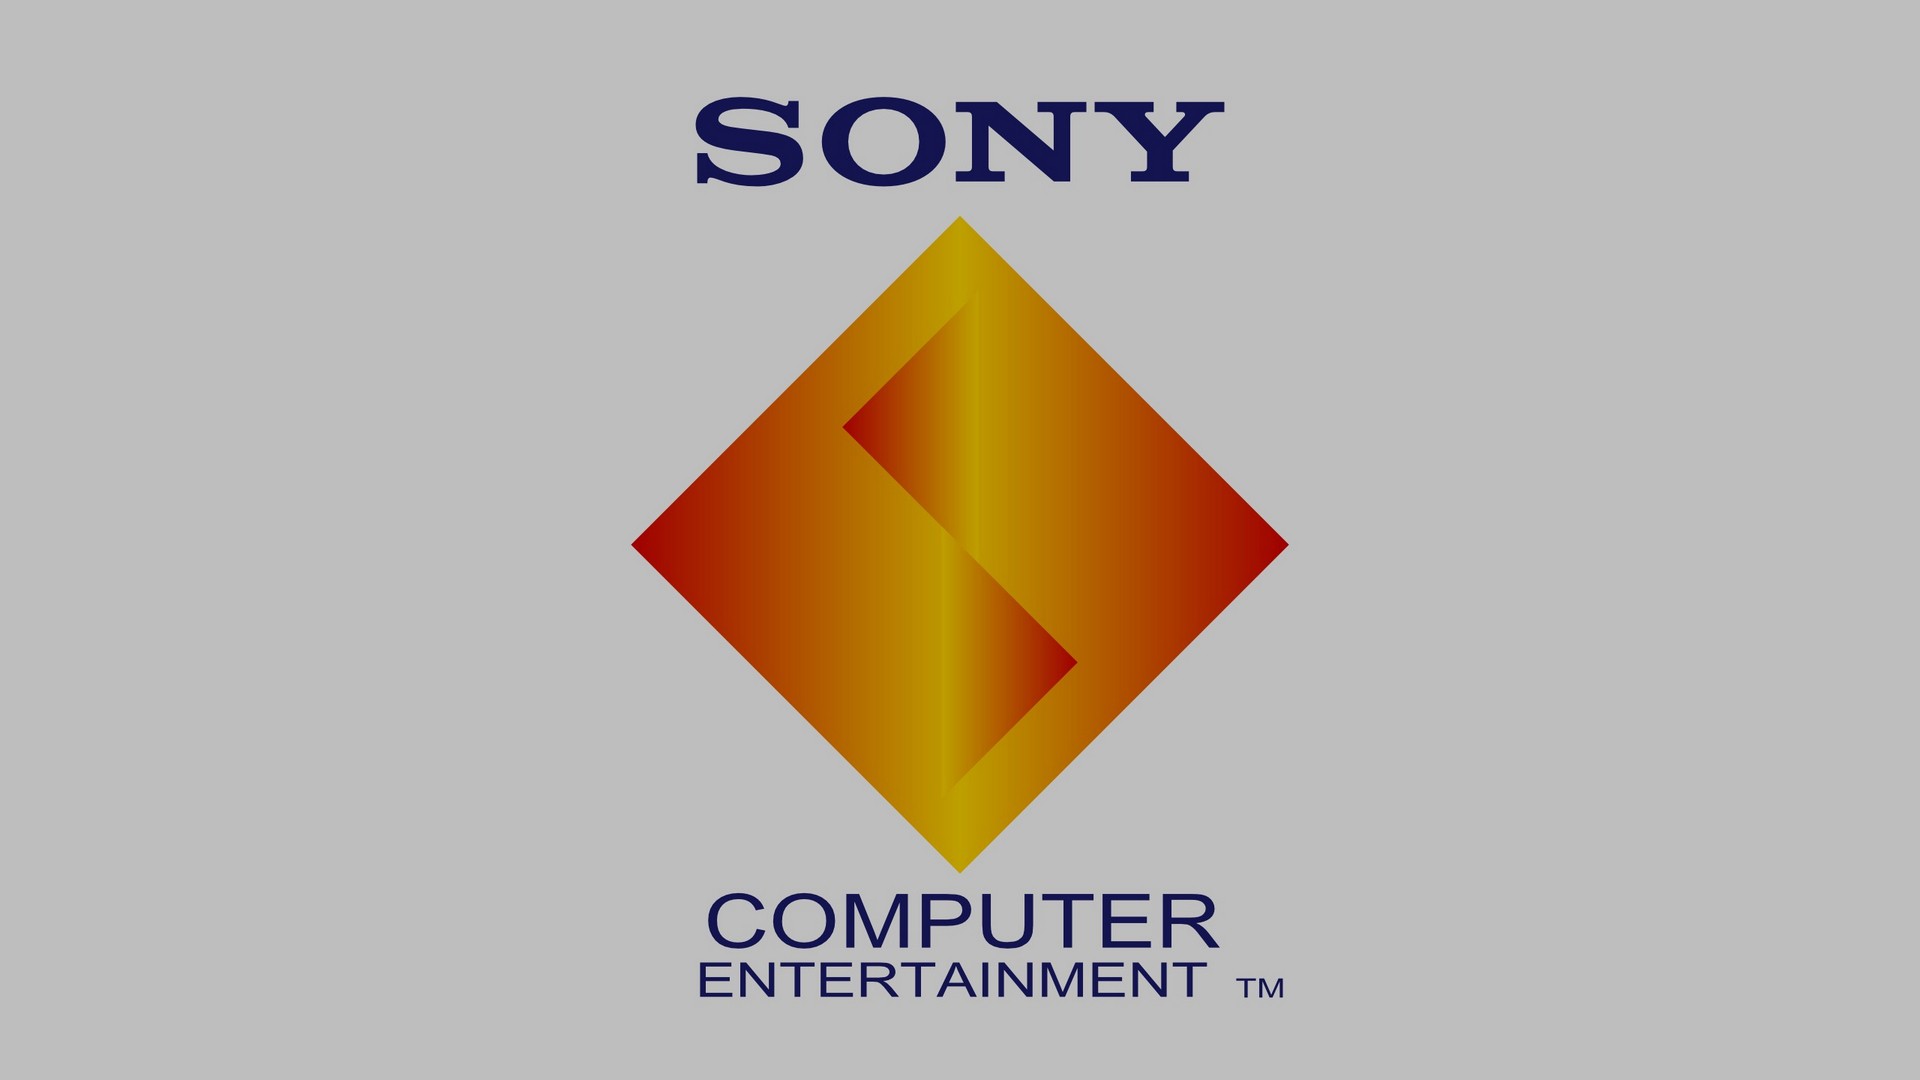 General 1920x1080 consoles Sony nostalgia logo Sony Computer Entertainment Sony Playstation simple background video games